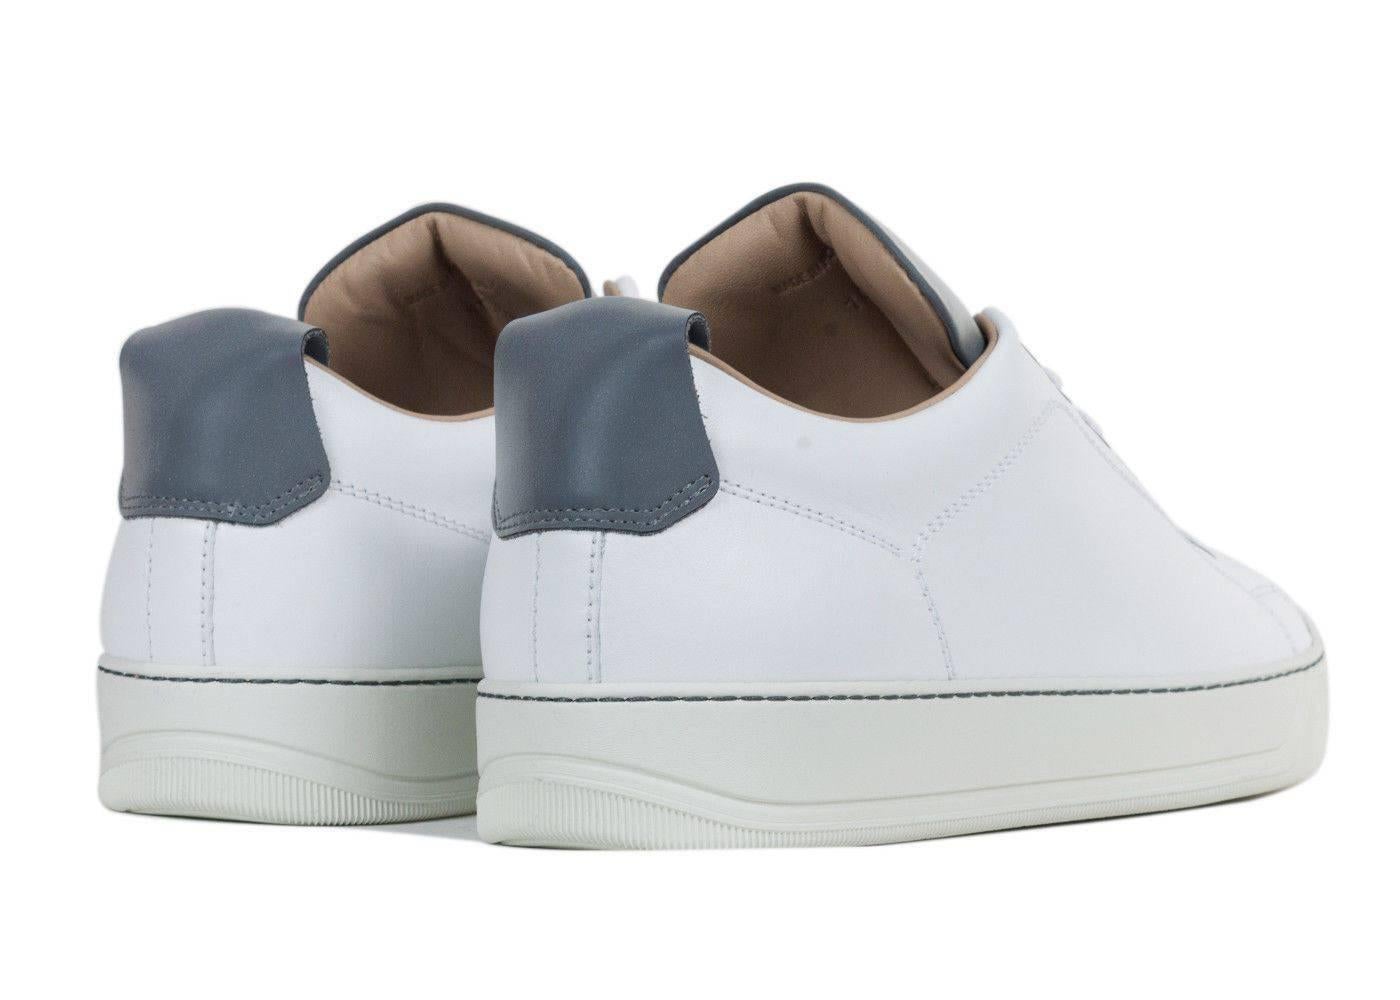 Brand New In Original Box
Retails Online and In-stores for $590
Size UK 12/ US 13  Fits True to Size

The smoothest man in the room definitely owns a pair of Lanvin Cap Toe Sneakers. This modern work of art features a lustrous suede body topped off